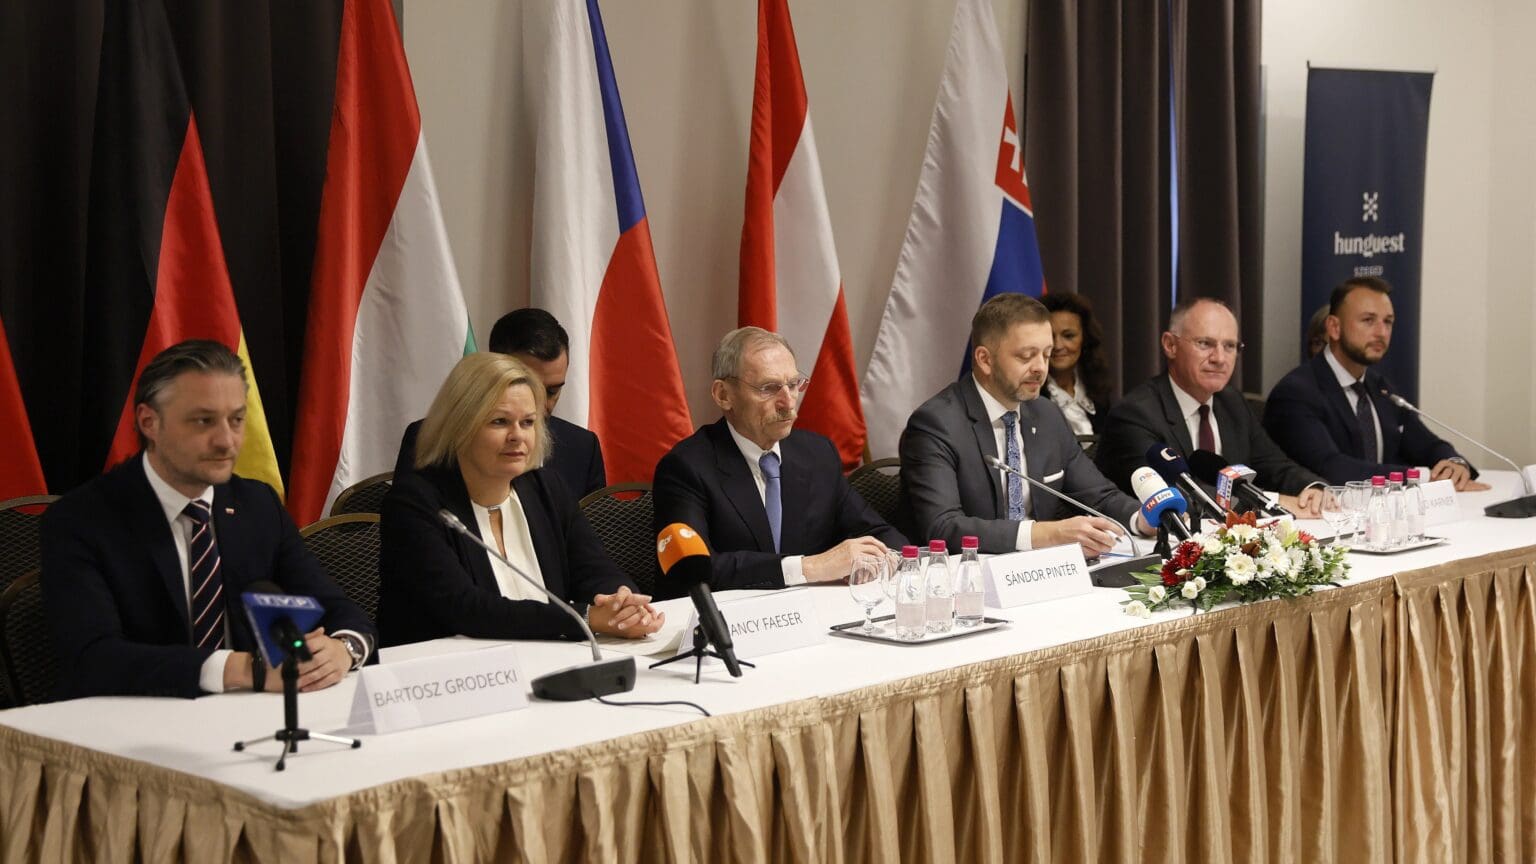 Central Europe’s Interior Ministers Agree on the Need to Combat Illegal Migration